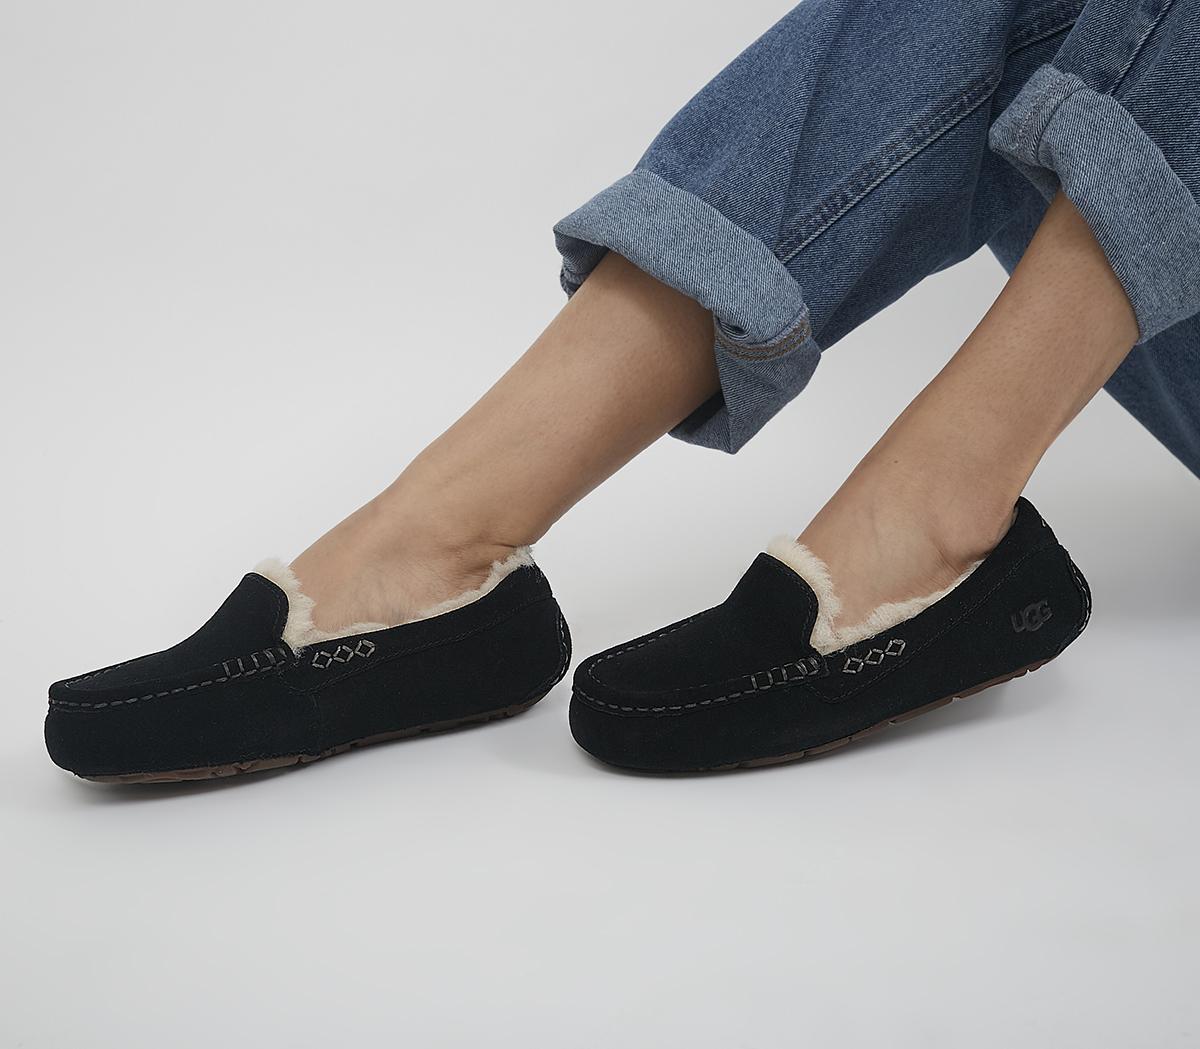 UGG Ansley Slippers Black Flat Shoes for Women